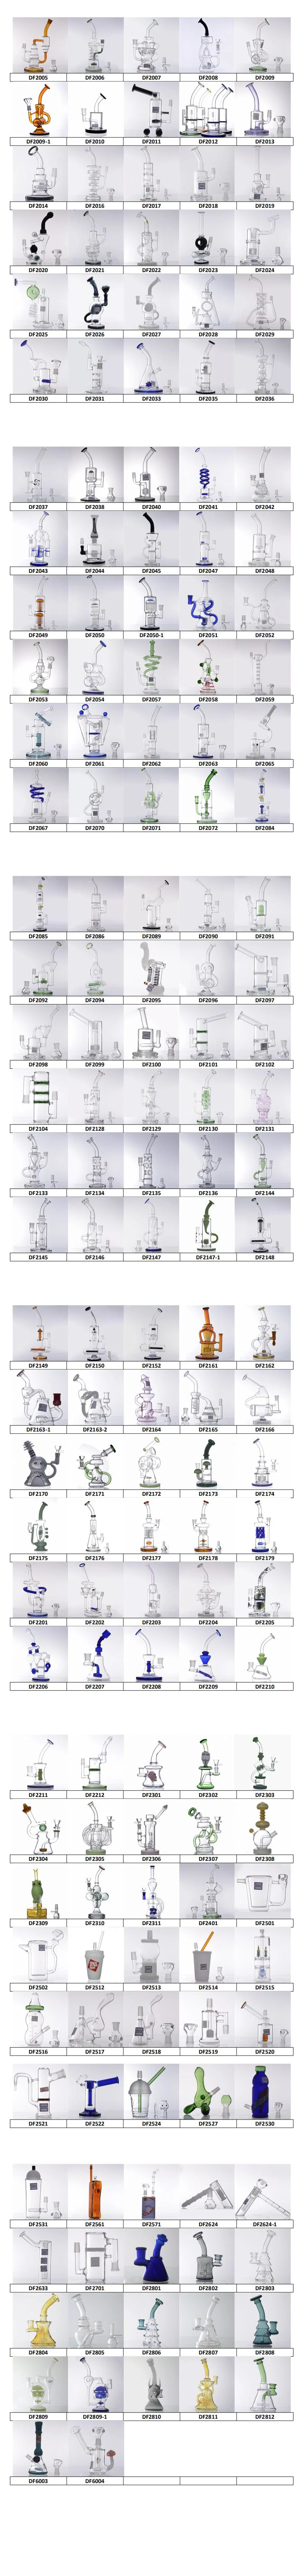 DF1028 Bh Smoking Water Pipes with High-End Glass Shisha Hookah Pipe